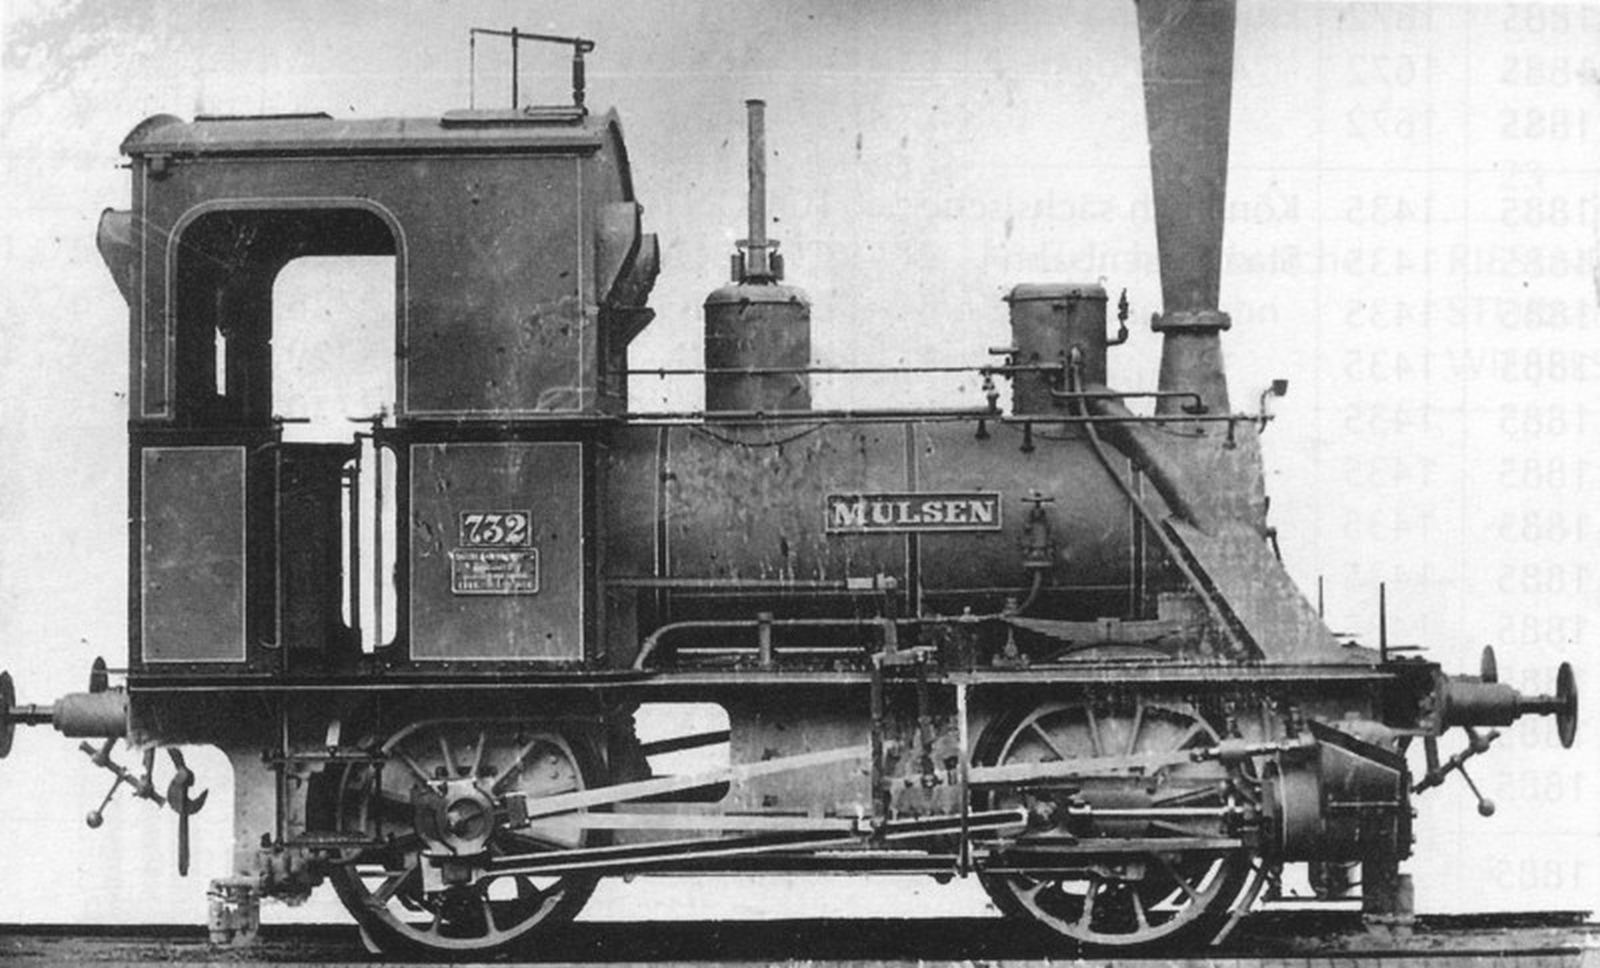 Works photo of the “Mülsen”